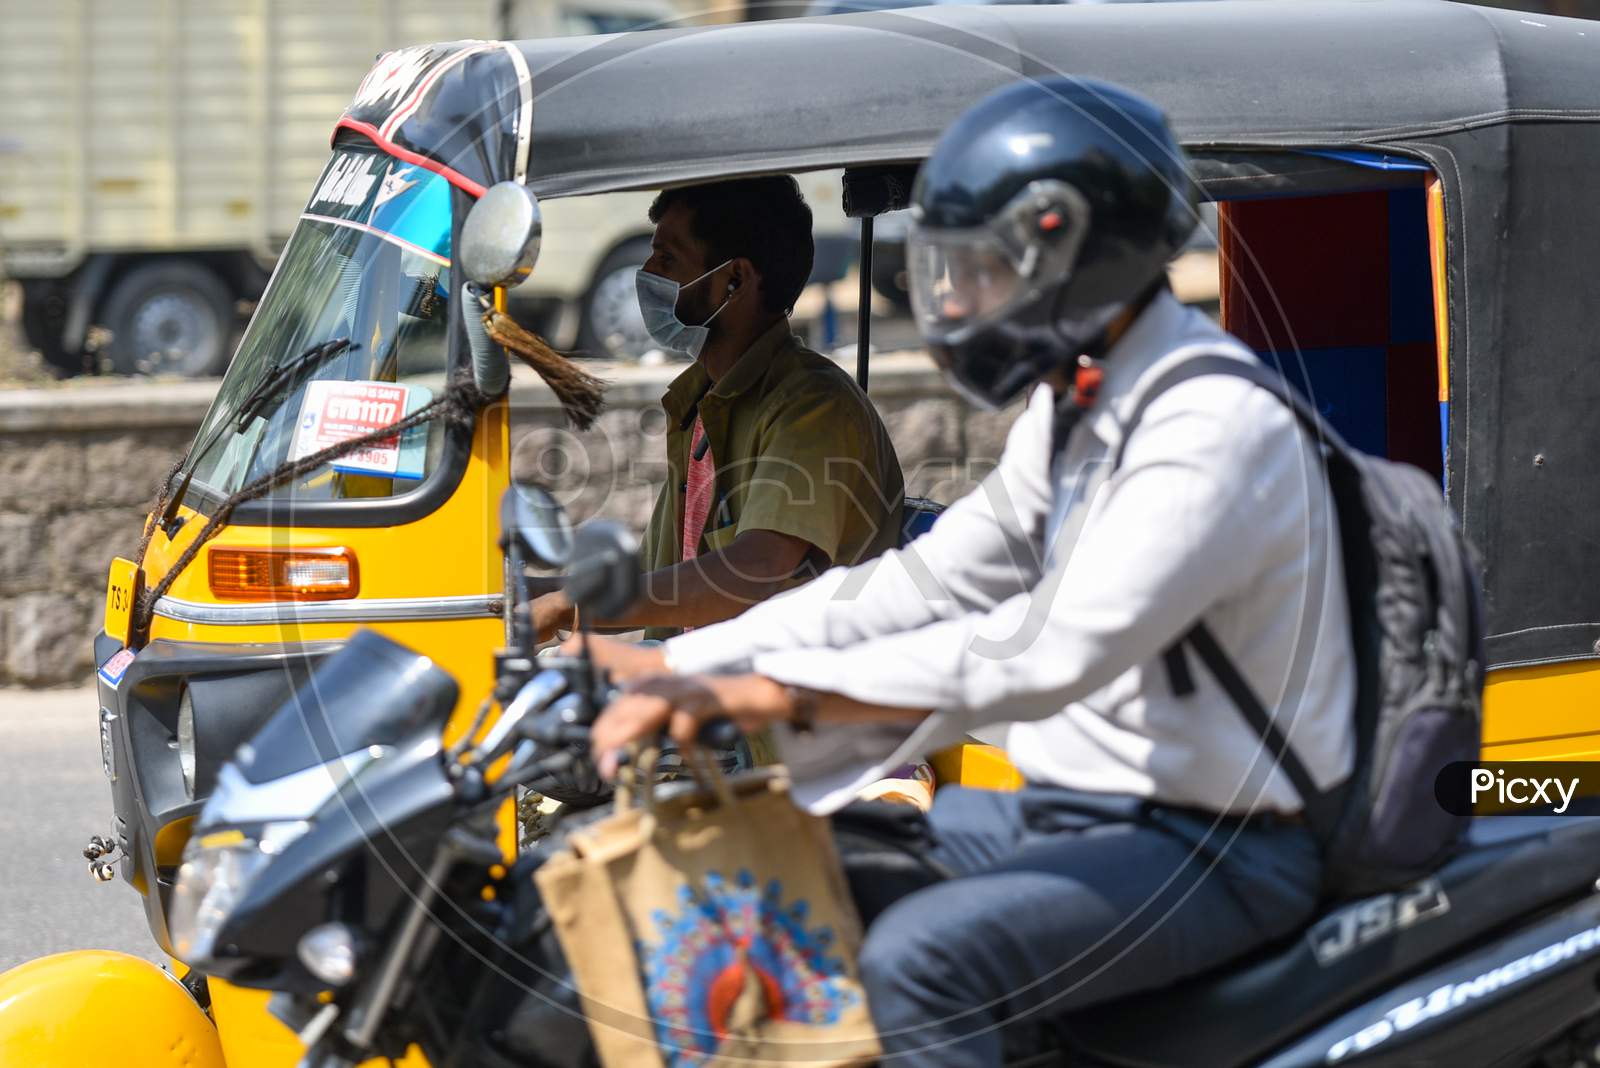 An Auto driver wearing a Face Masks amid Novel Corona Virus Outbreak in Hyderabad, COVID-19